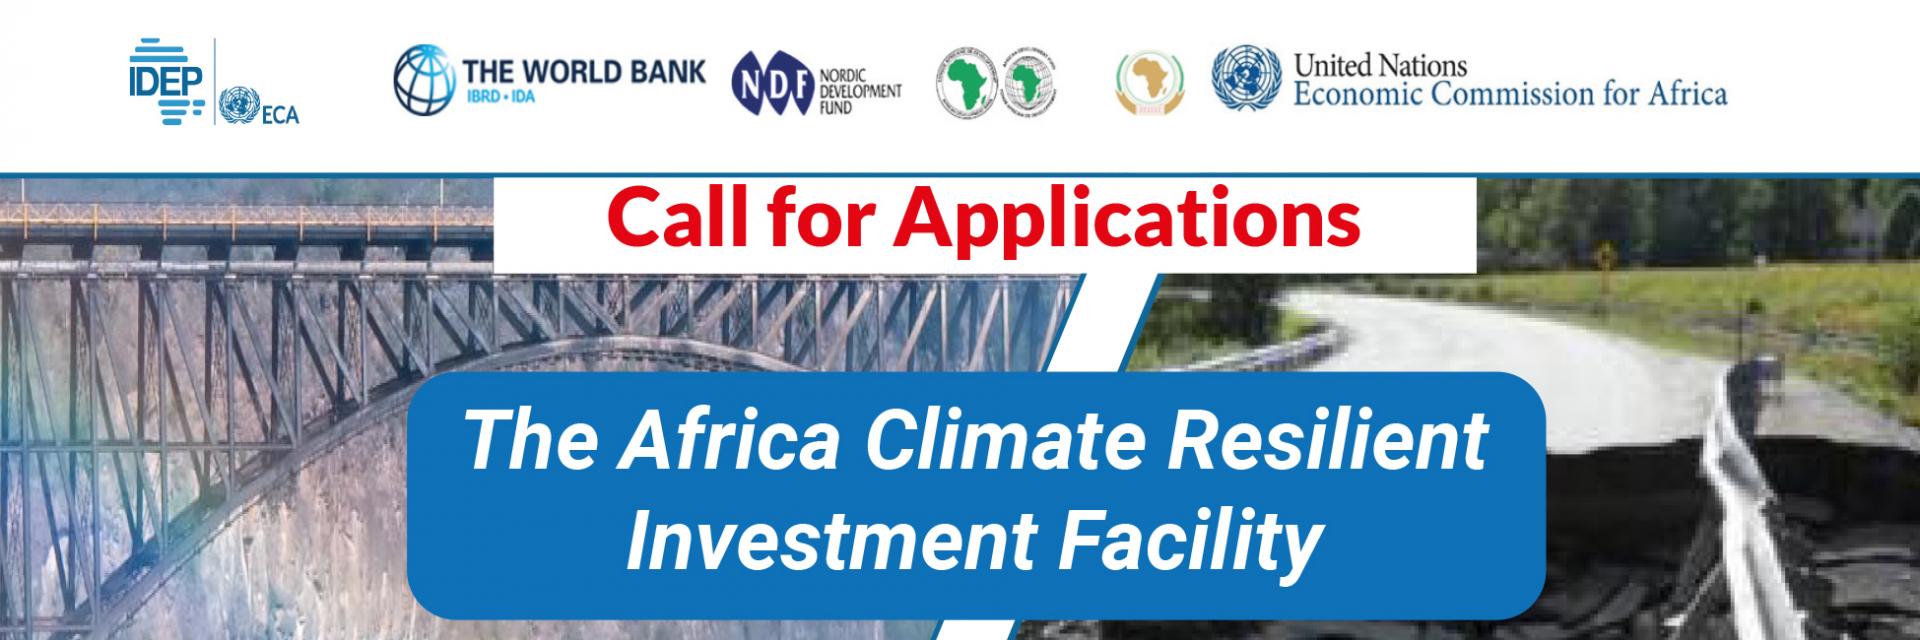 The Africa Climate Resilient Investment Facility